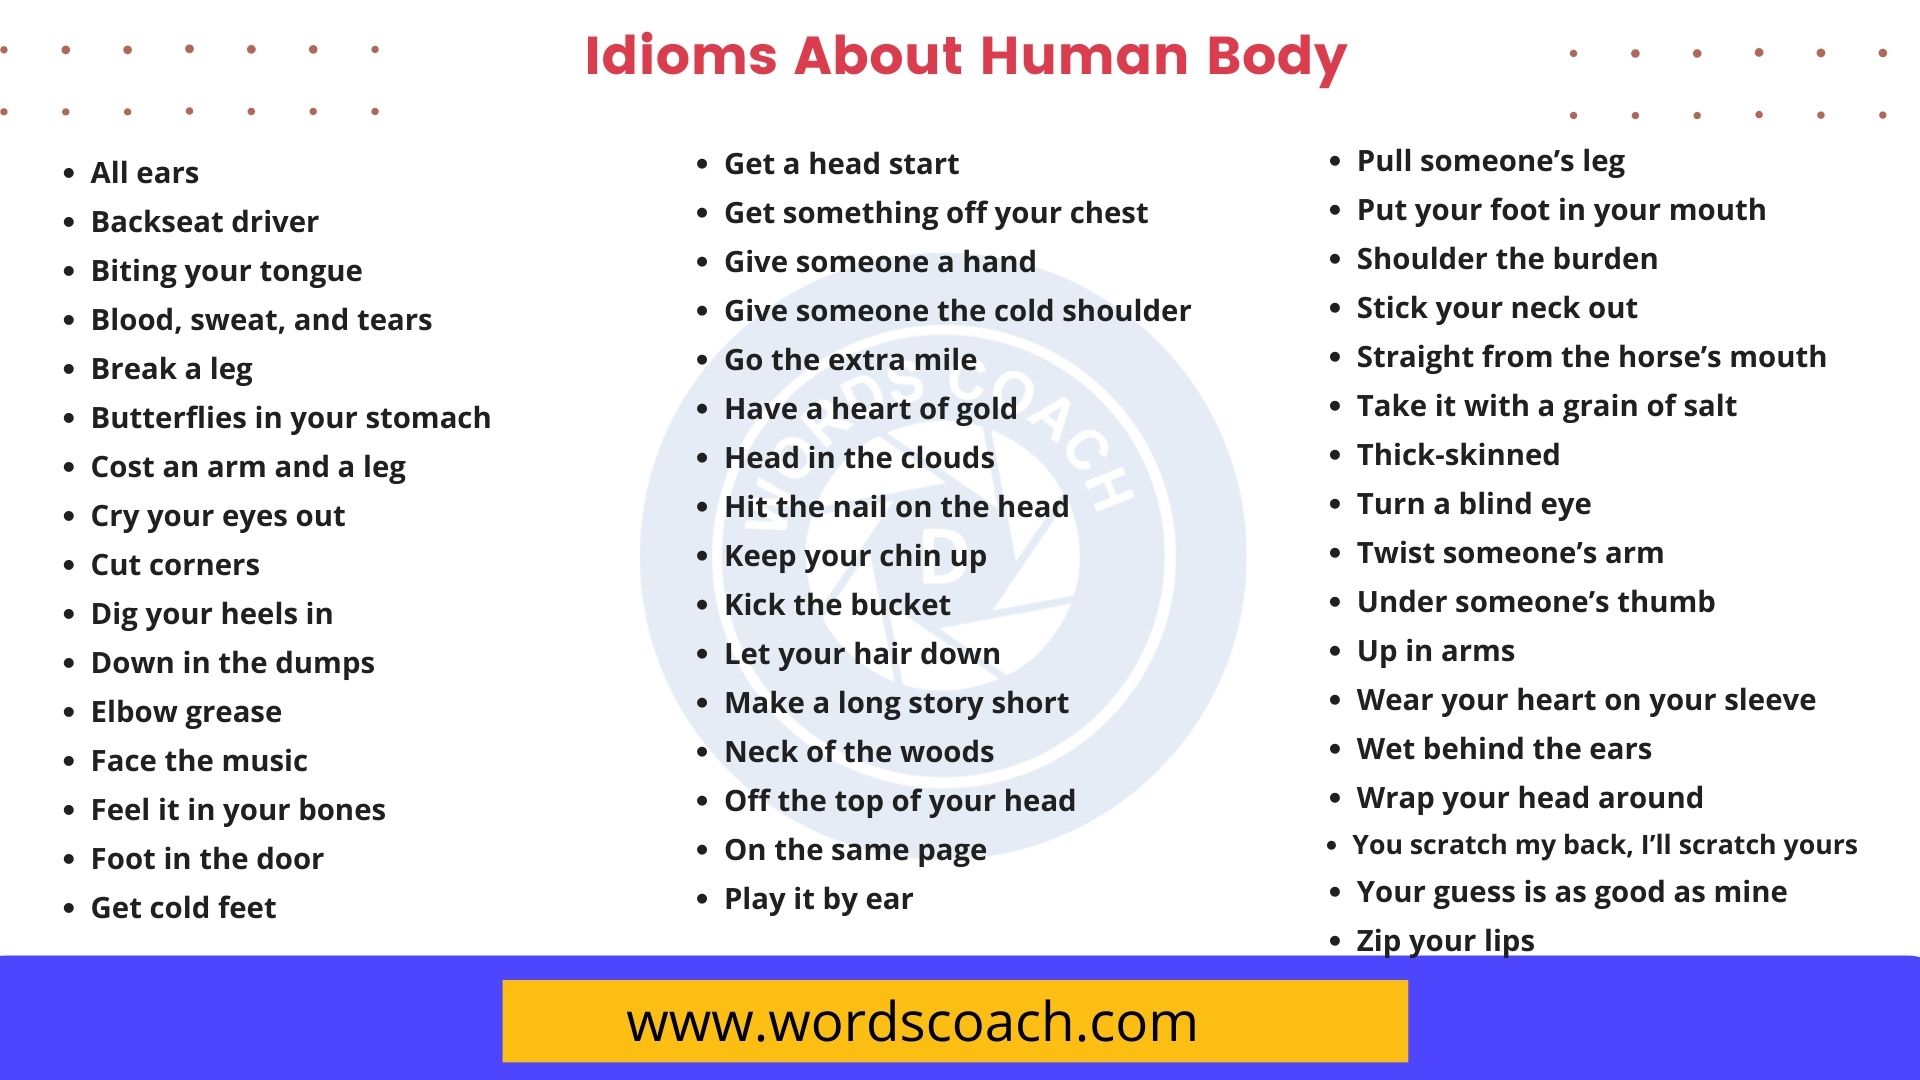 50 Idioms About Human Body Word Coach